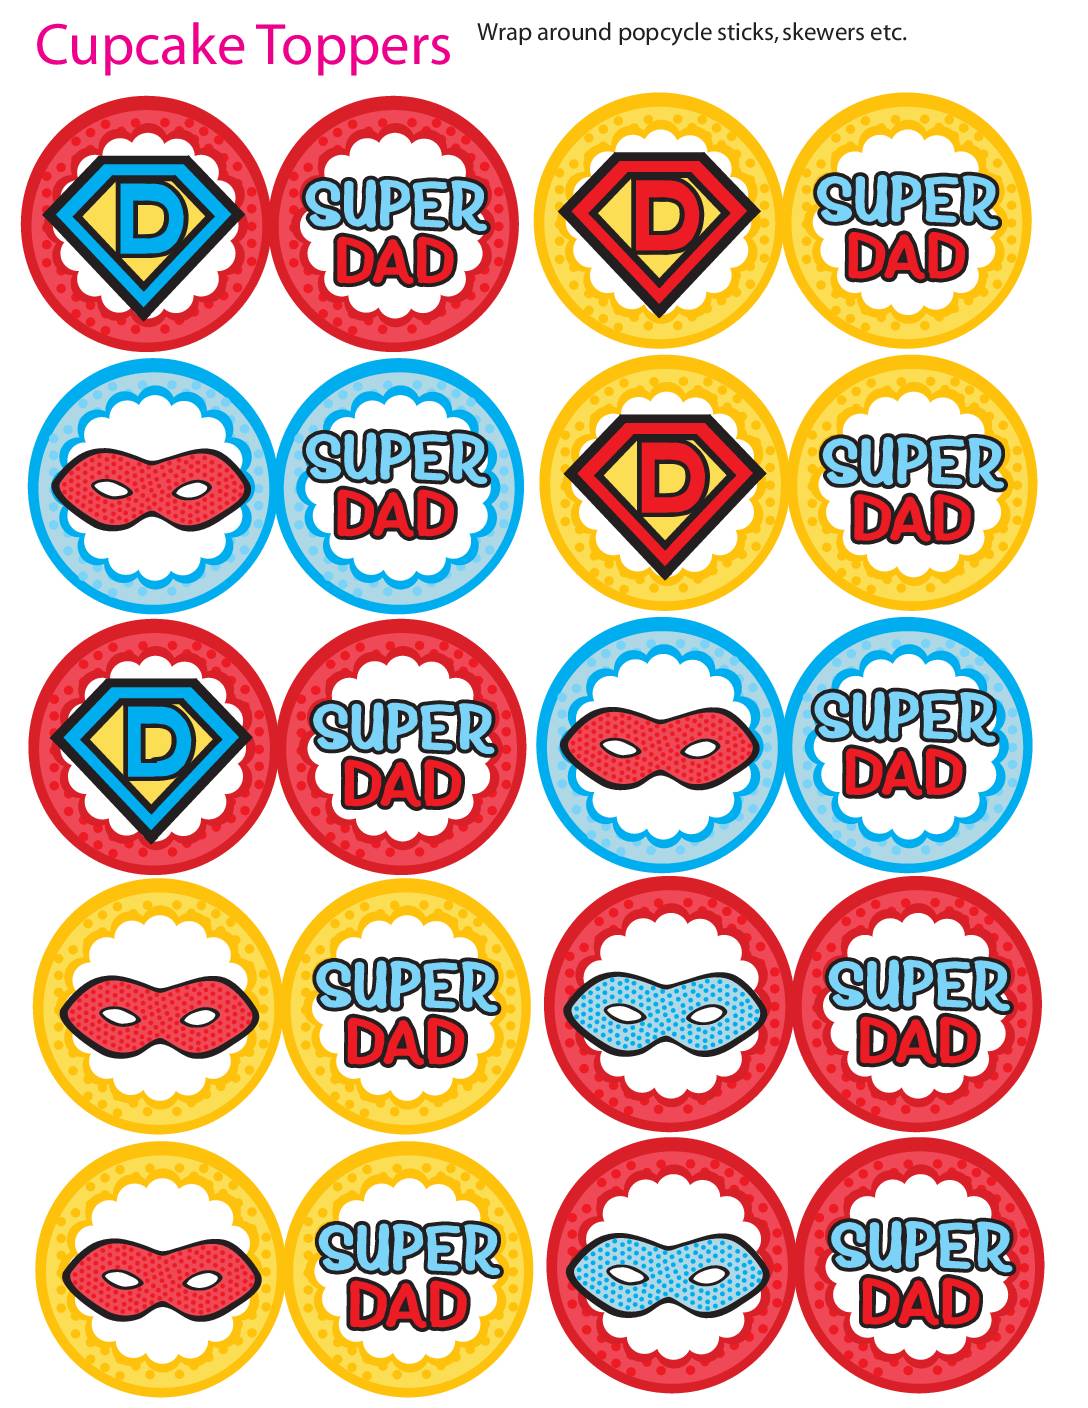 Cupcake Toppers Super Dad Cupcake Wrappers